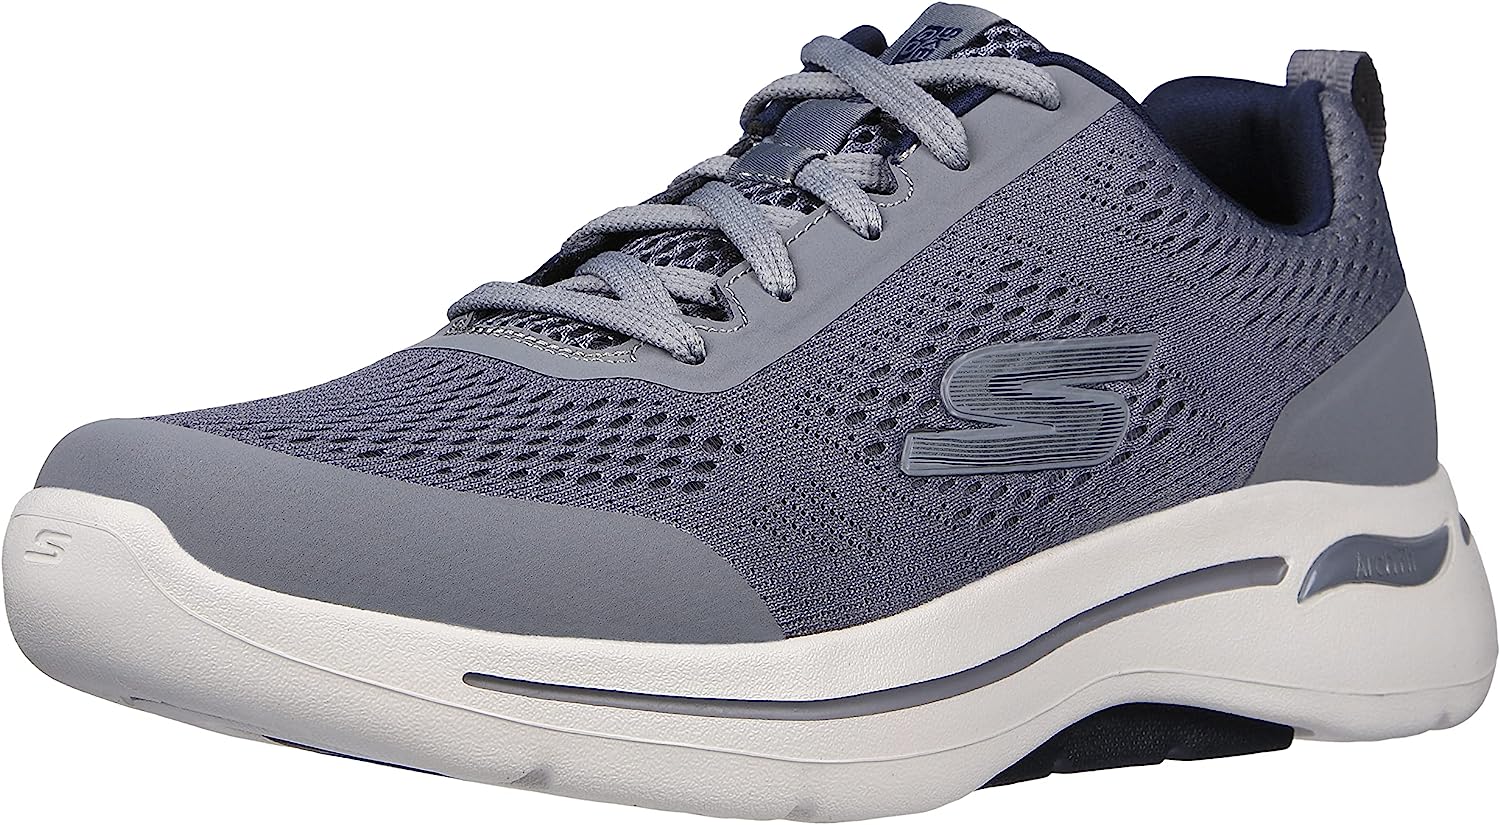 wide fit mens running shoes review